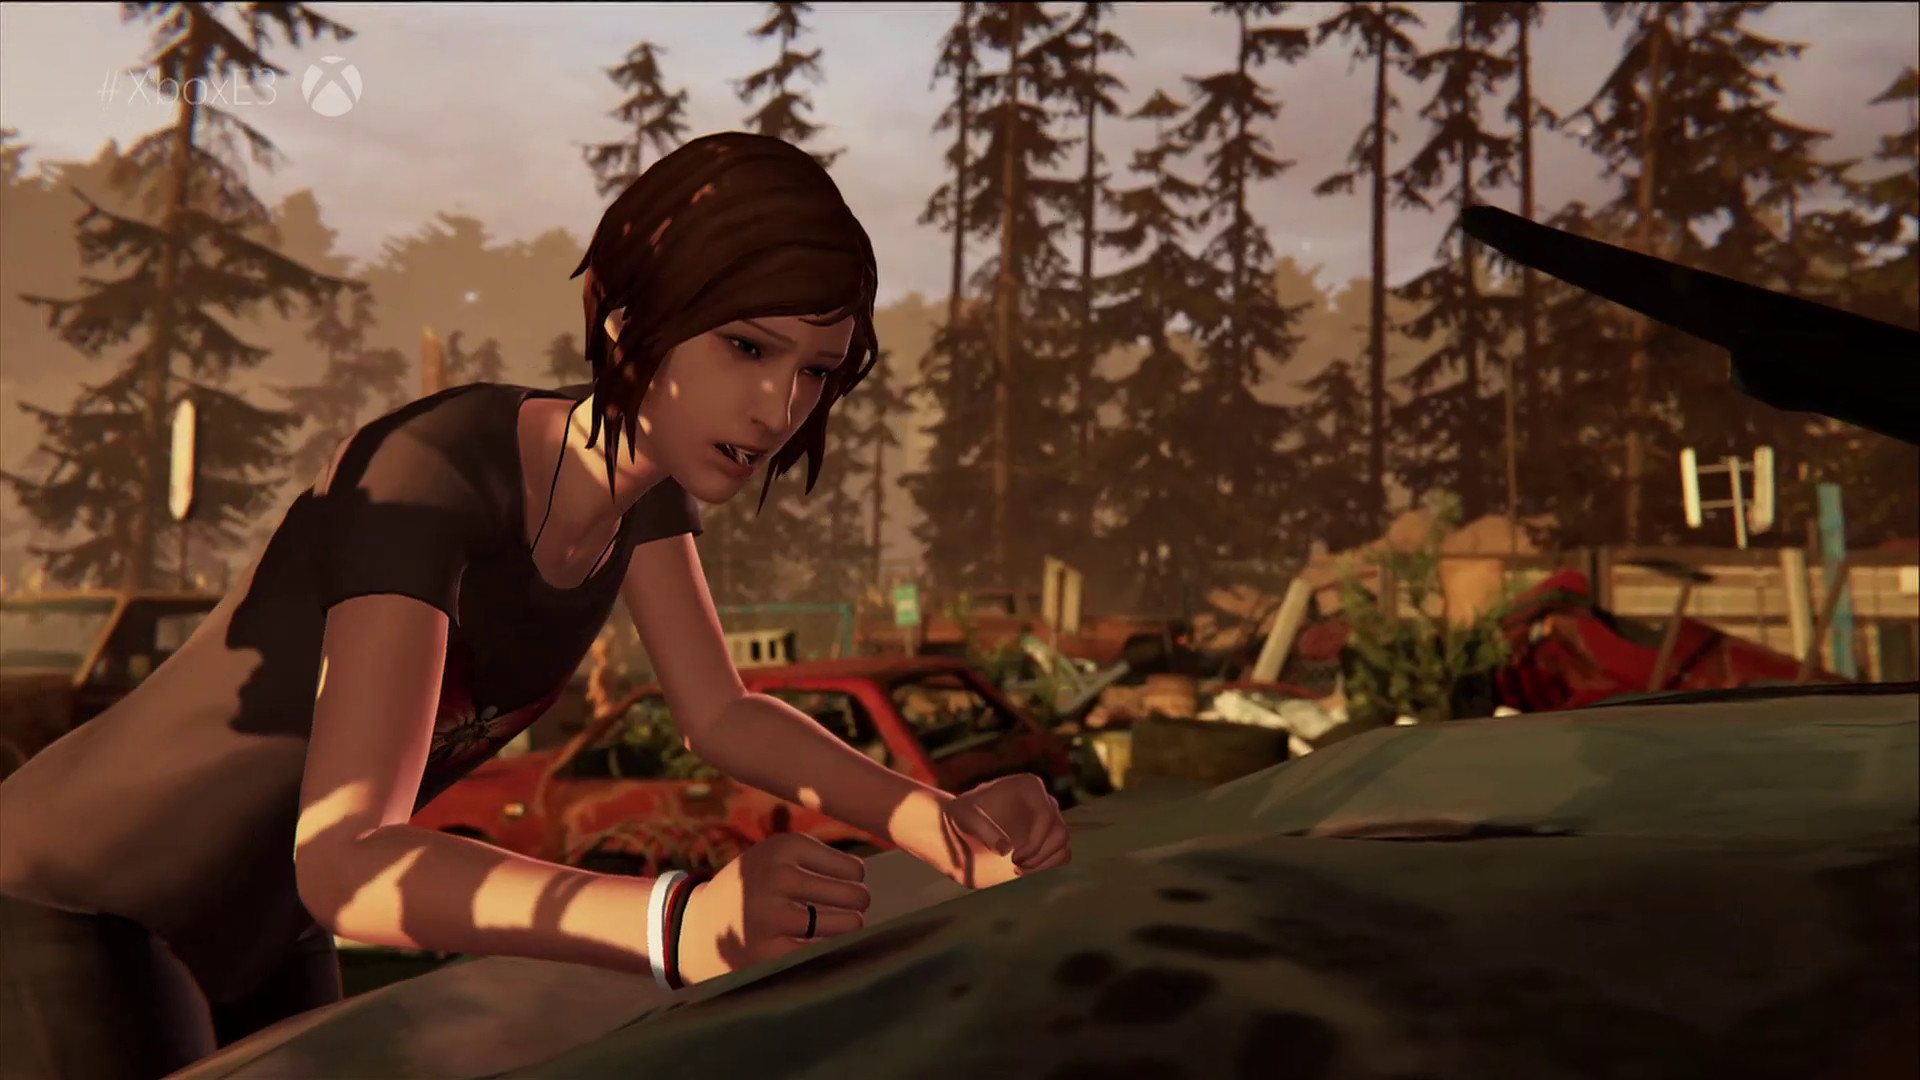 Get ready for a hella teen time in Life is Strange Before the Storm, a prequel starring Chloe and Rachel before the events of the first game